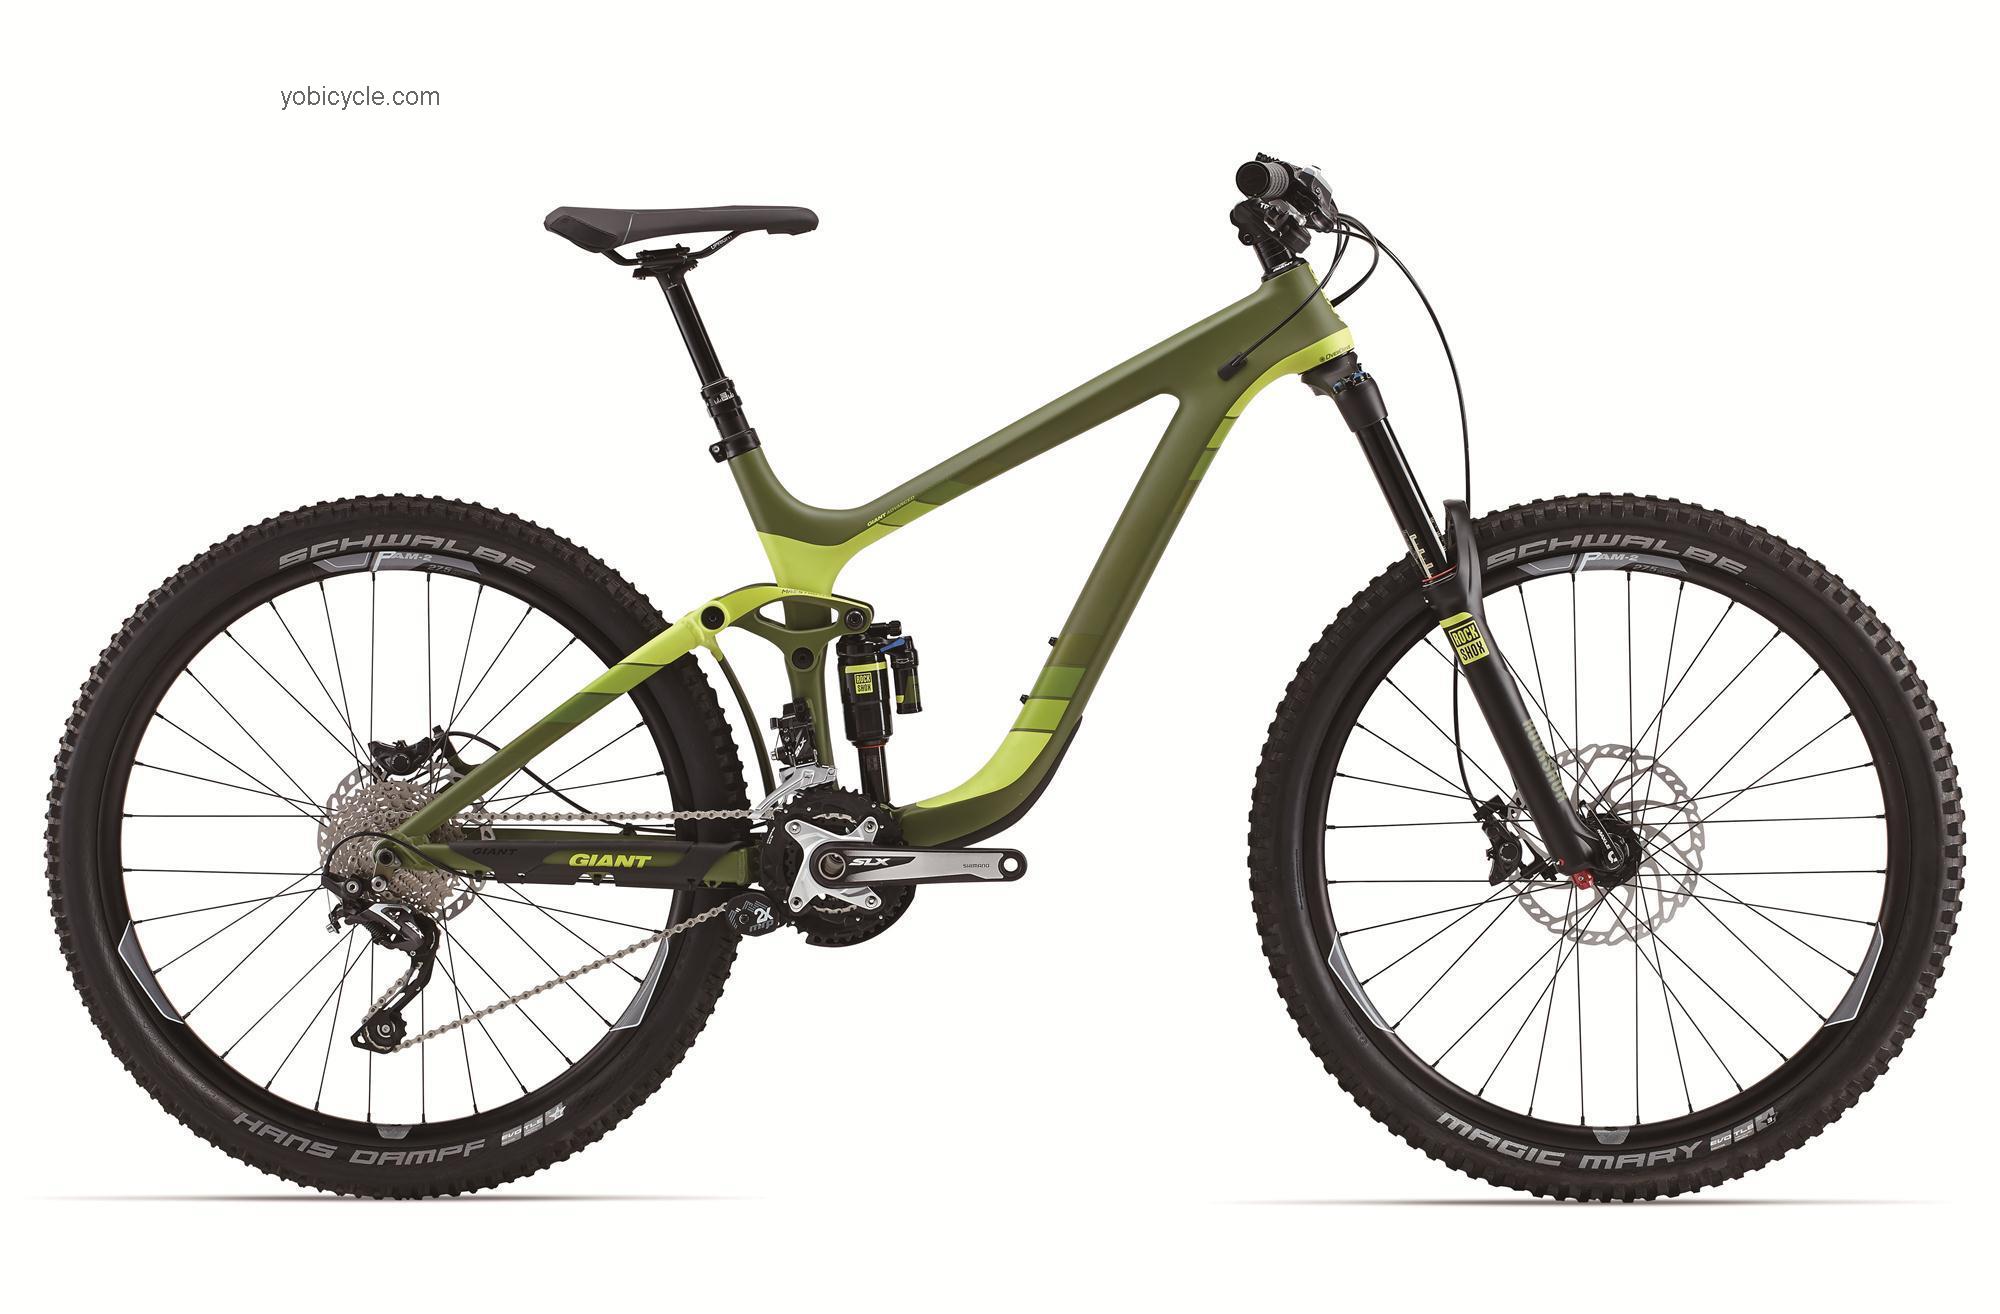 Giant Reign Advanced 27.5 1 2015 comparison online with competitors